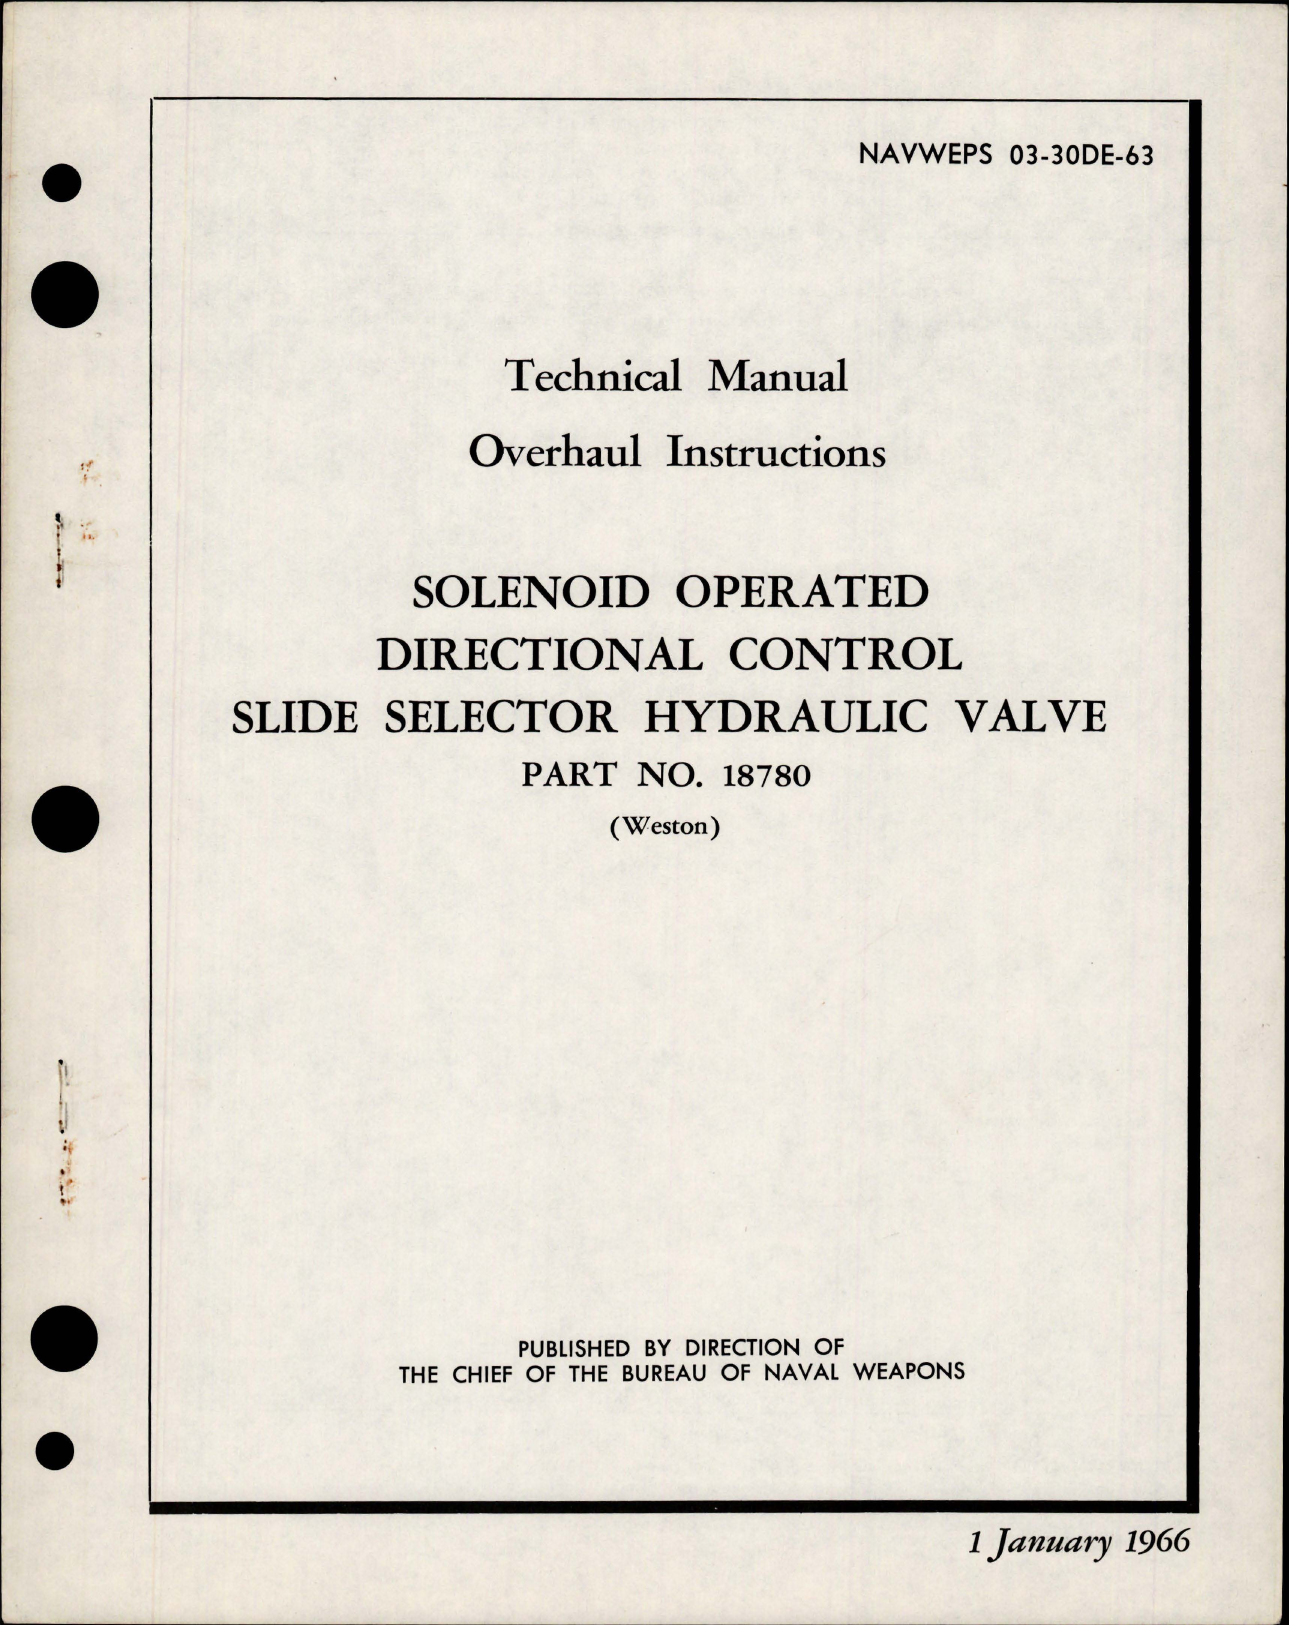 Sample page 1 from AirCorps Library document: Overhaul Instructions for Solenoid Operated Directional Control Slide Selector Hydraulic Valve 